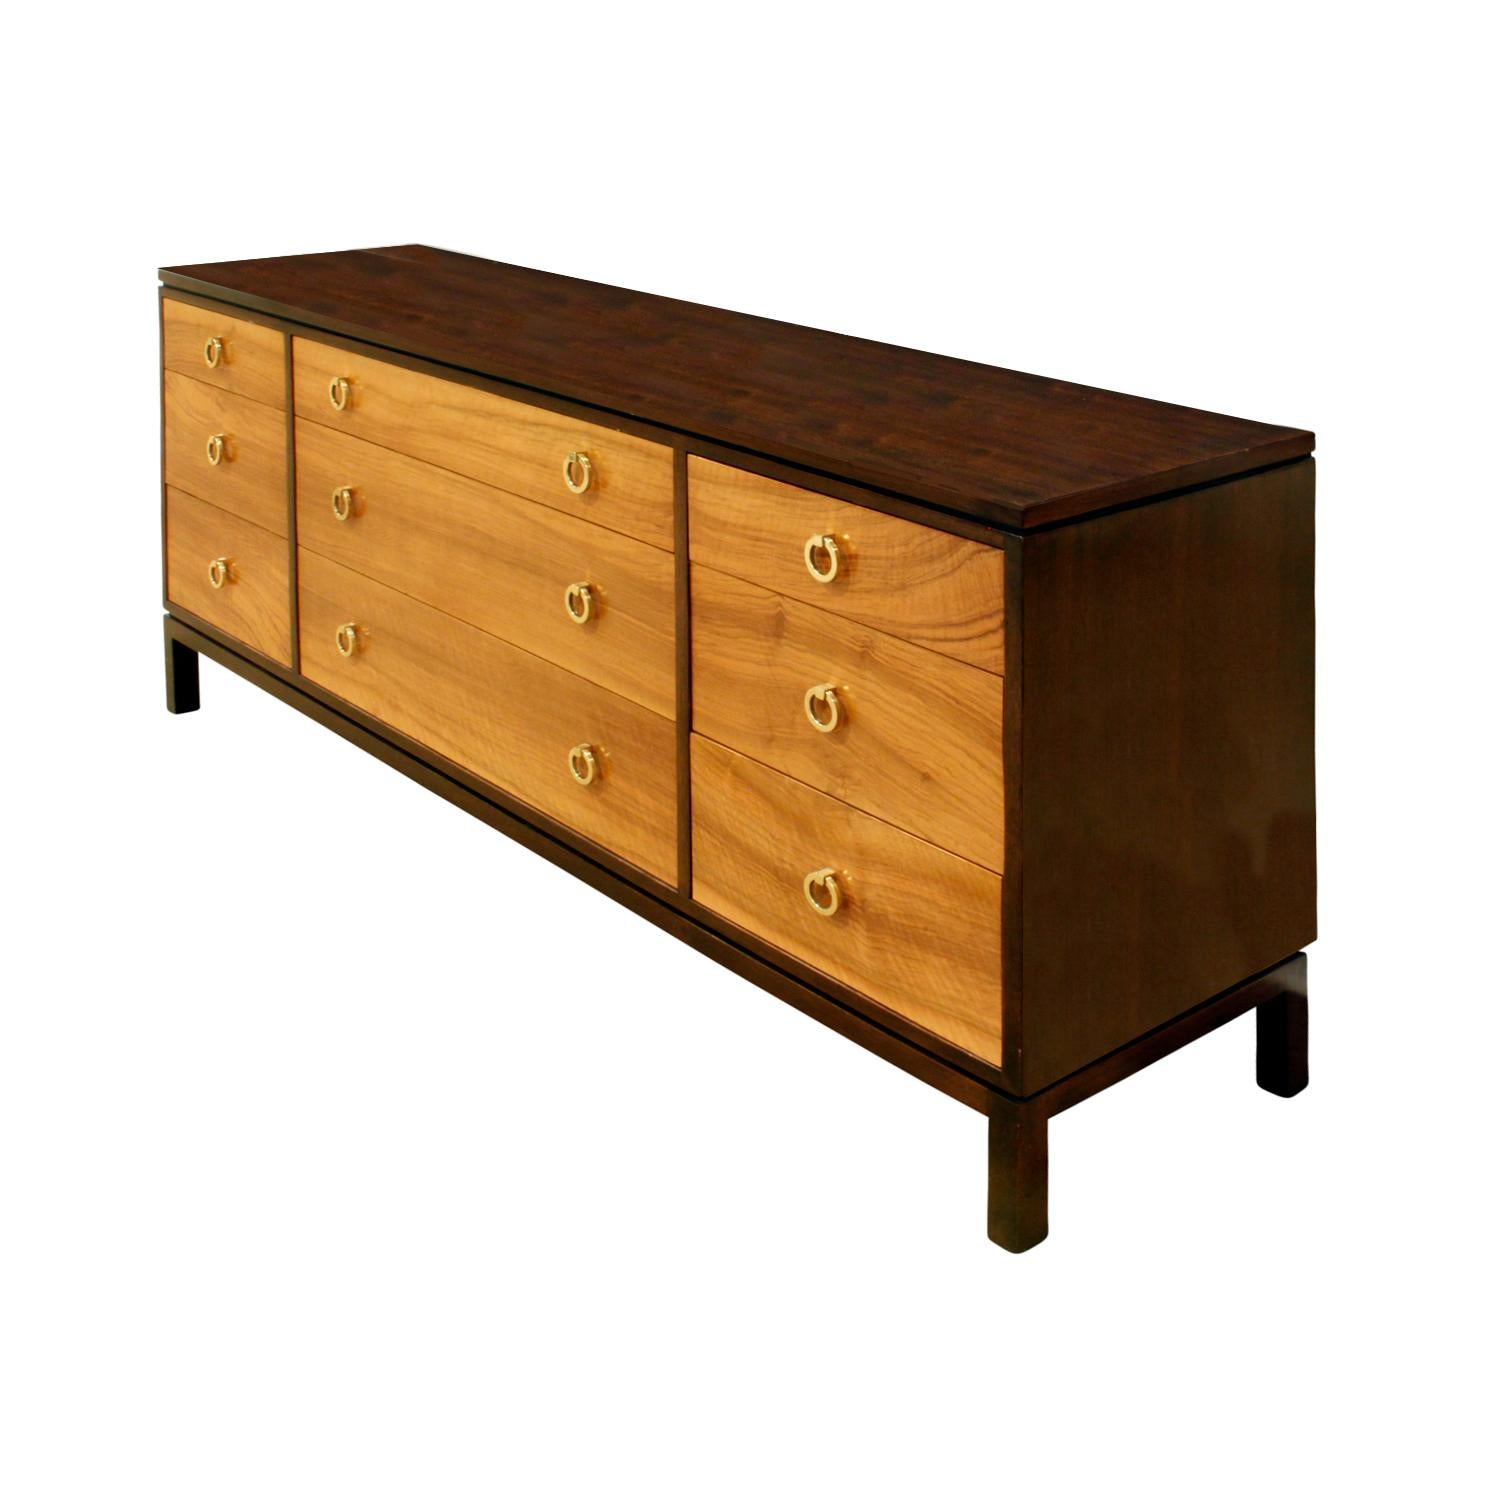 Long chest model No. 6423 in mahogany with drawer fronts in French walnut with brass ring pulls by Edward Wormley for Dunbar, American 1964 (Brass label in left interior drawer reads “Dunbar, Berne, Indiana” and paper label on the back reads “Dunbar